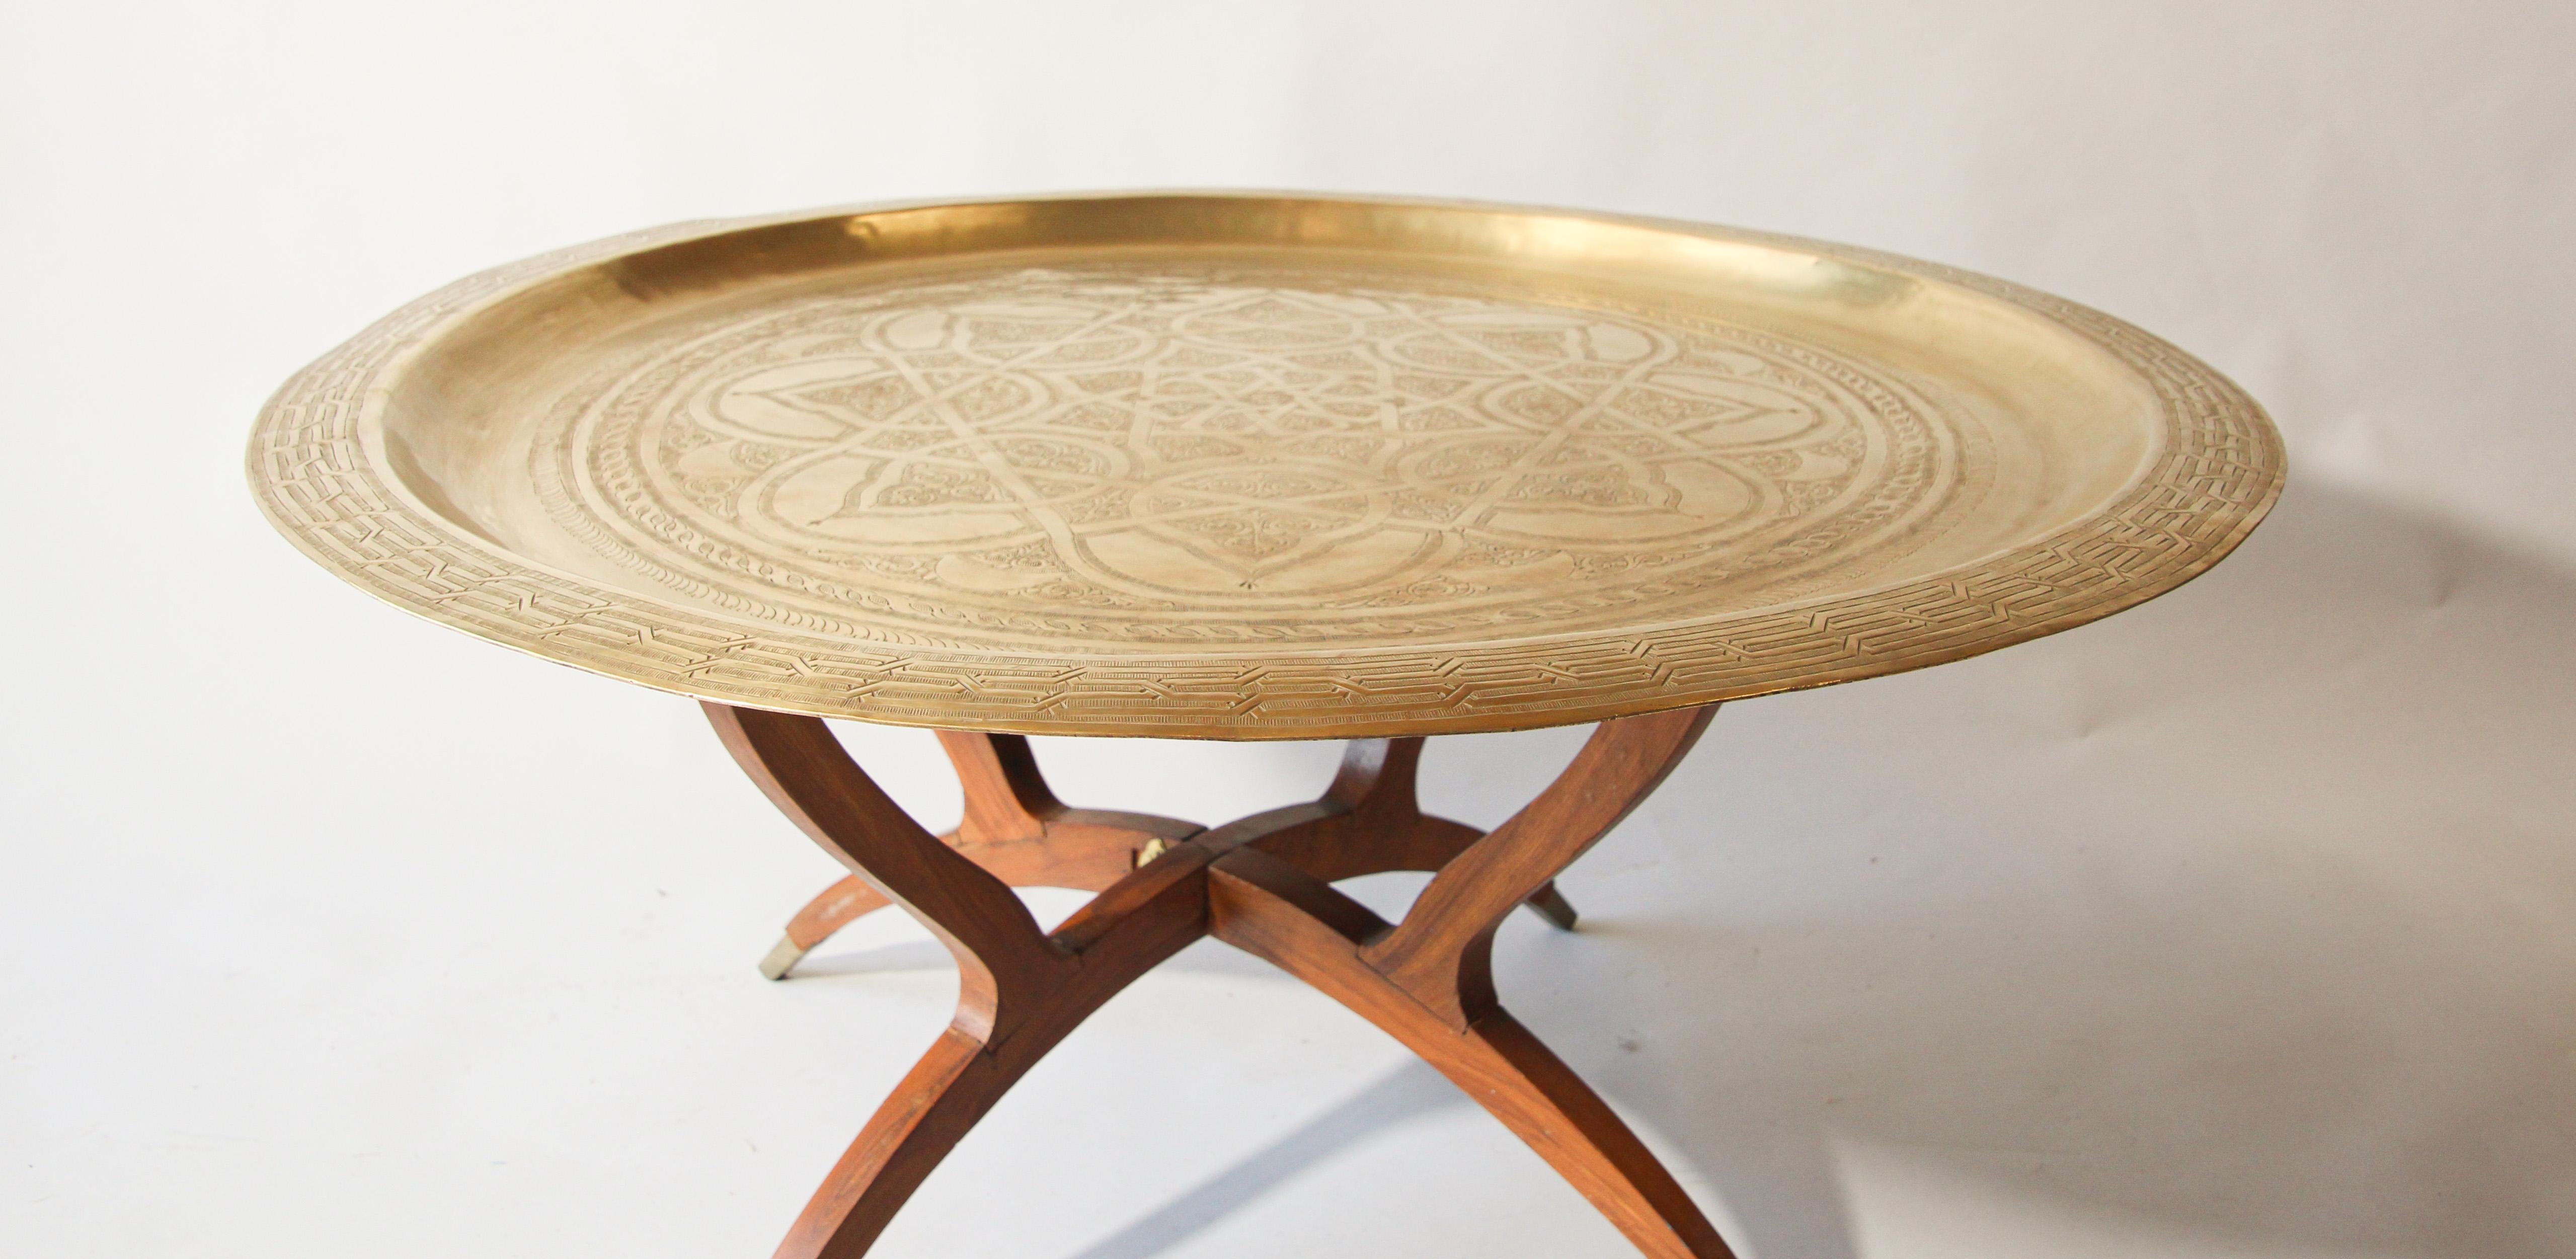 Moroccan Round Brass Tray Table on Folding Stand 1